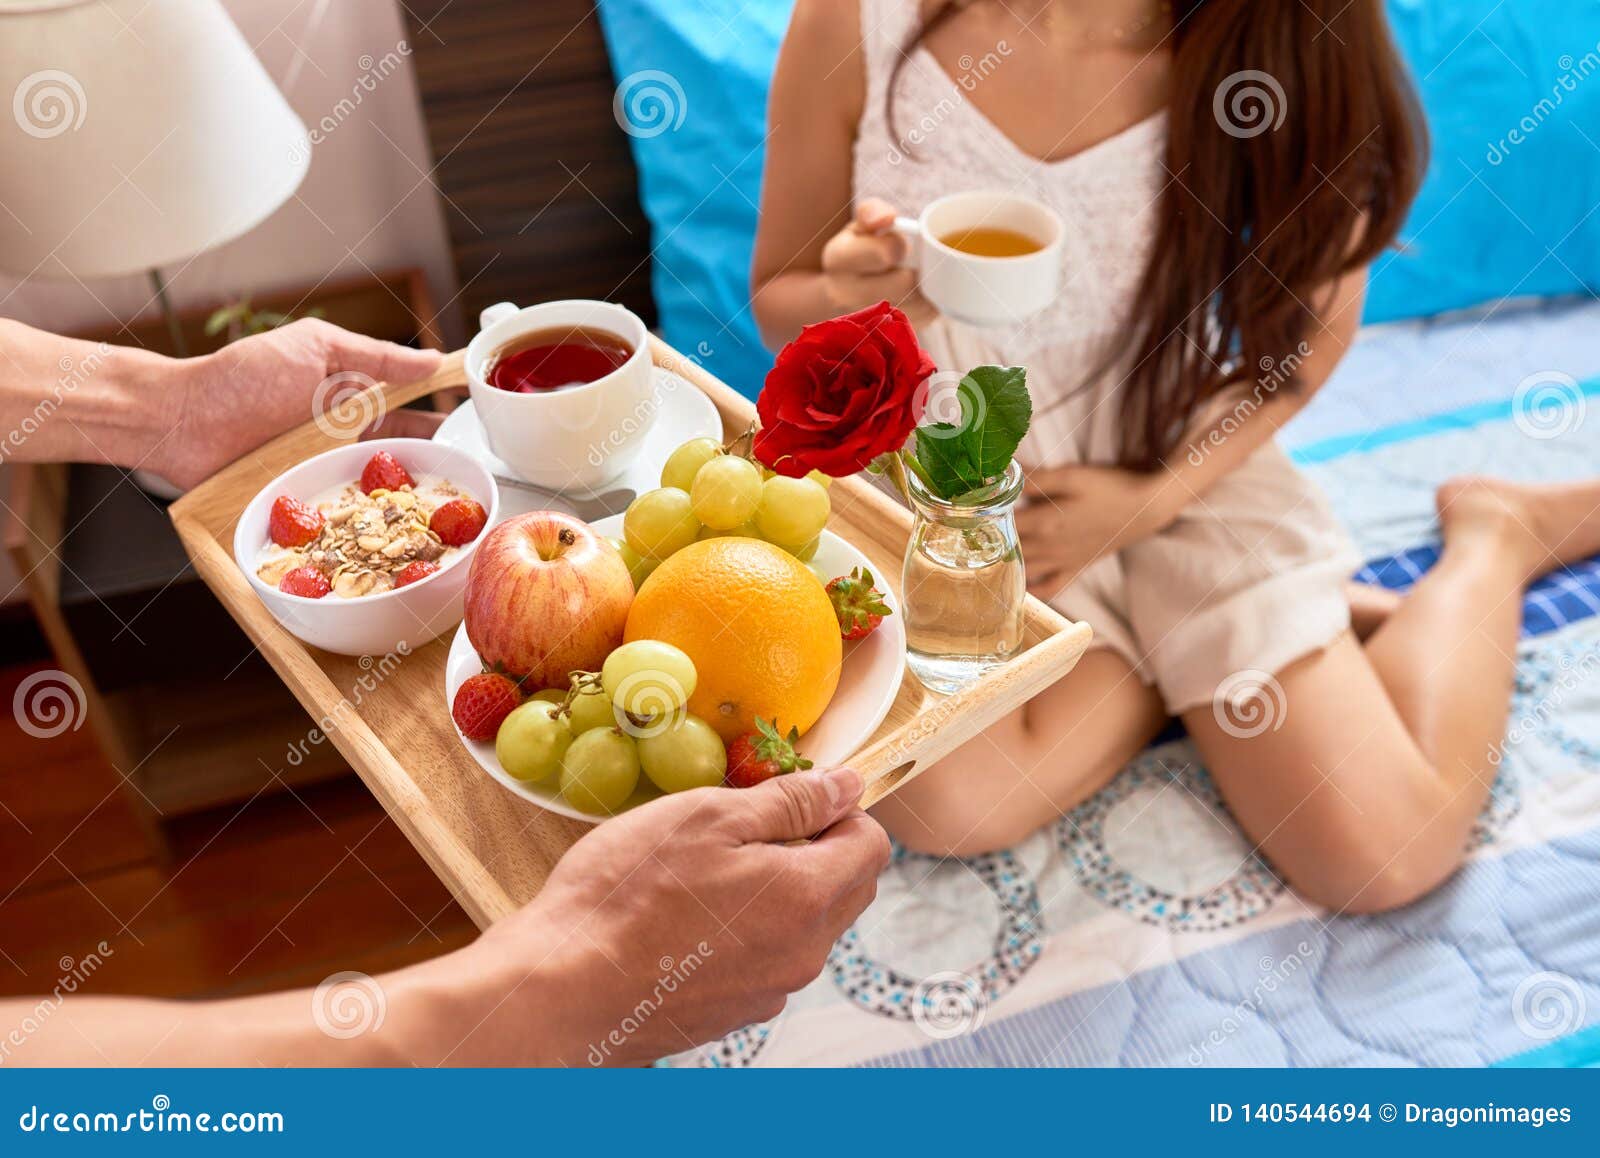 Serve breakfast in bed stock photo. Image of valentines - 140544694